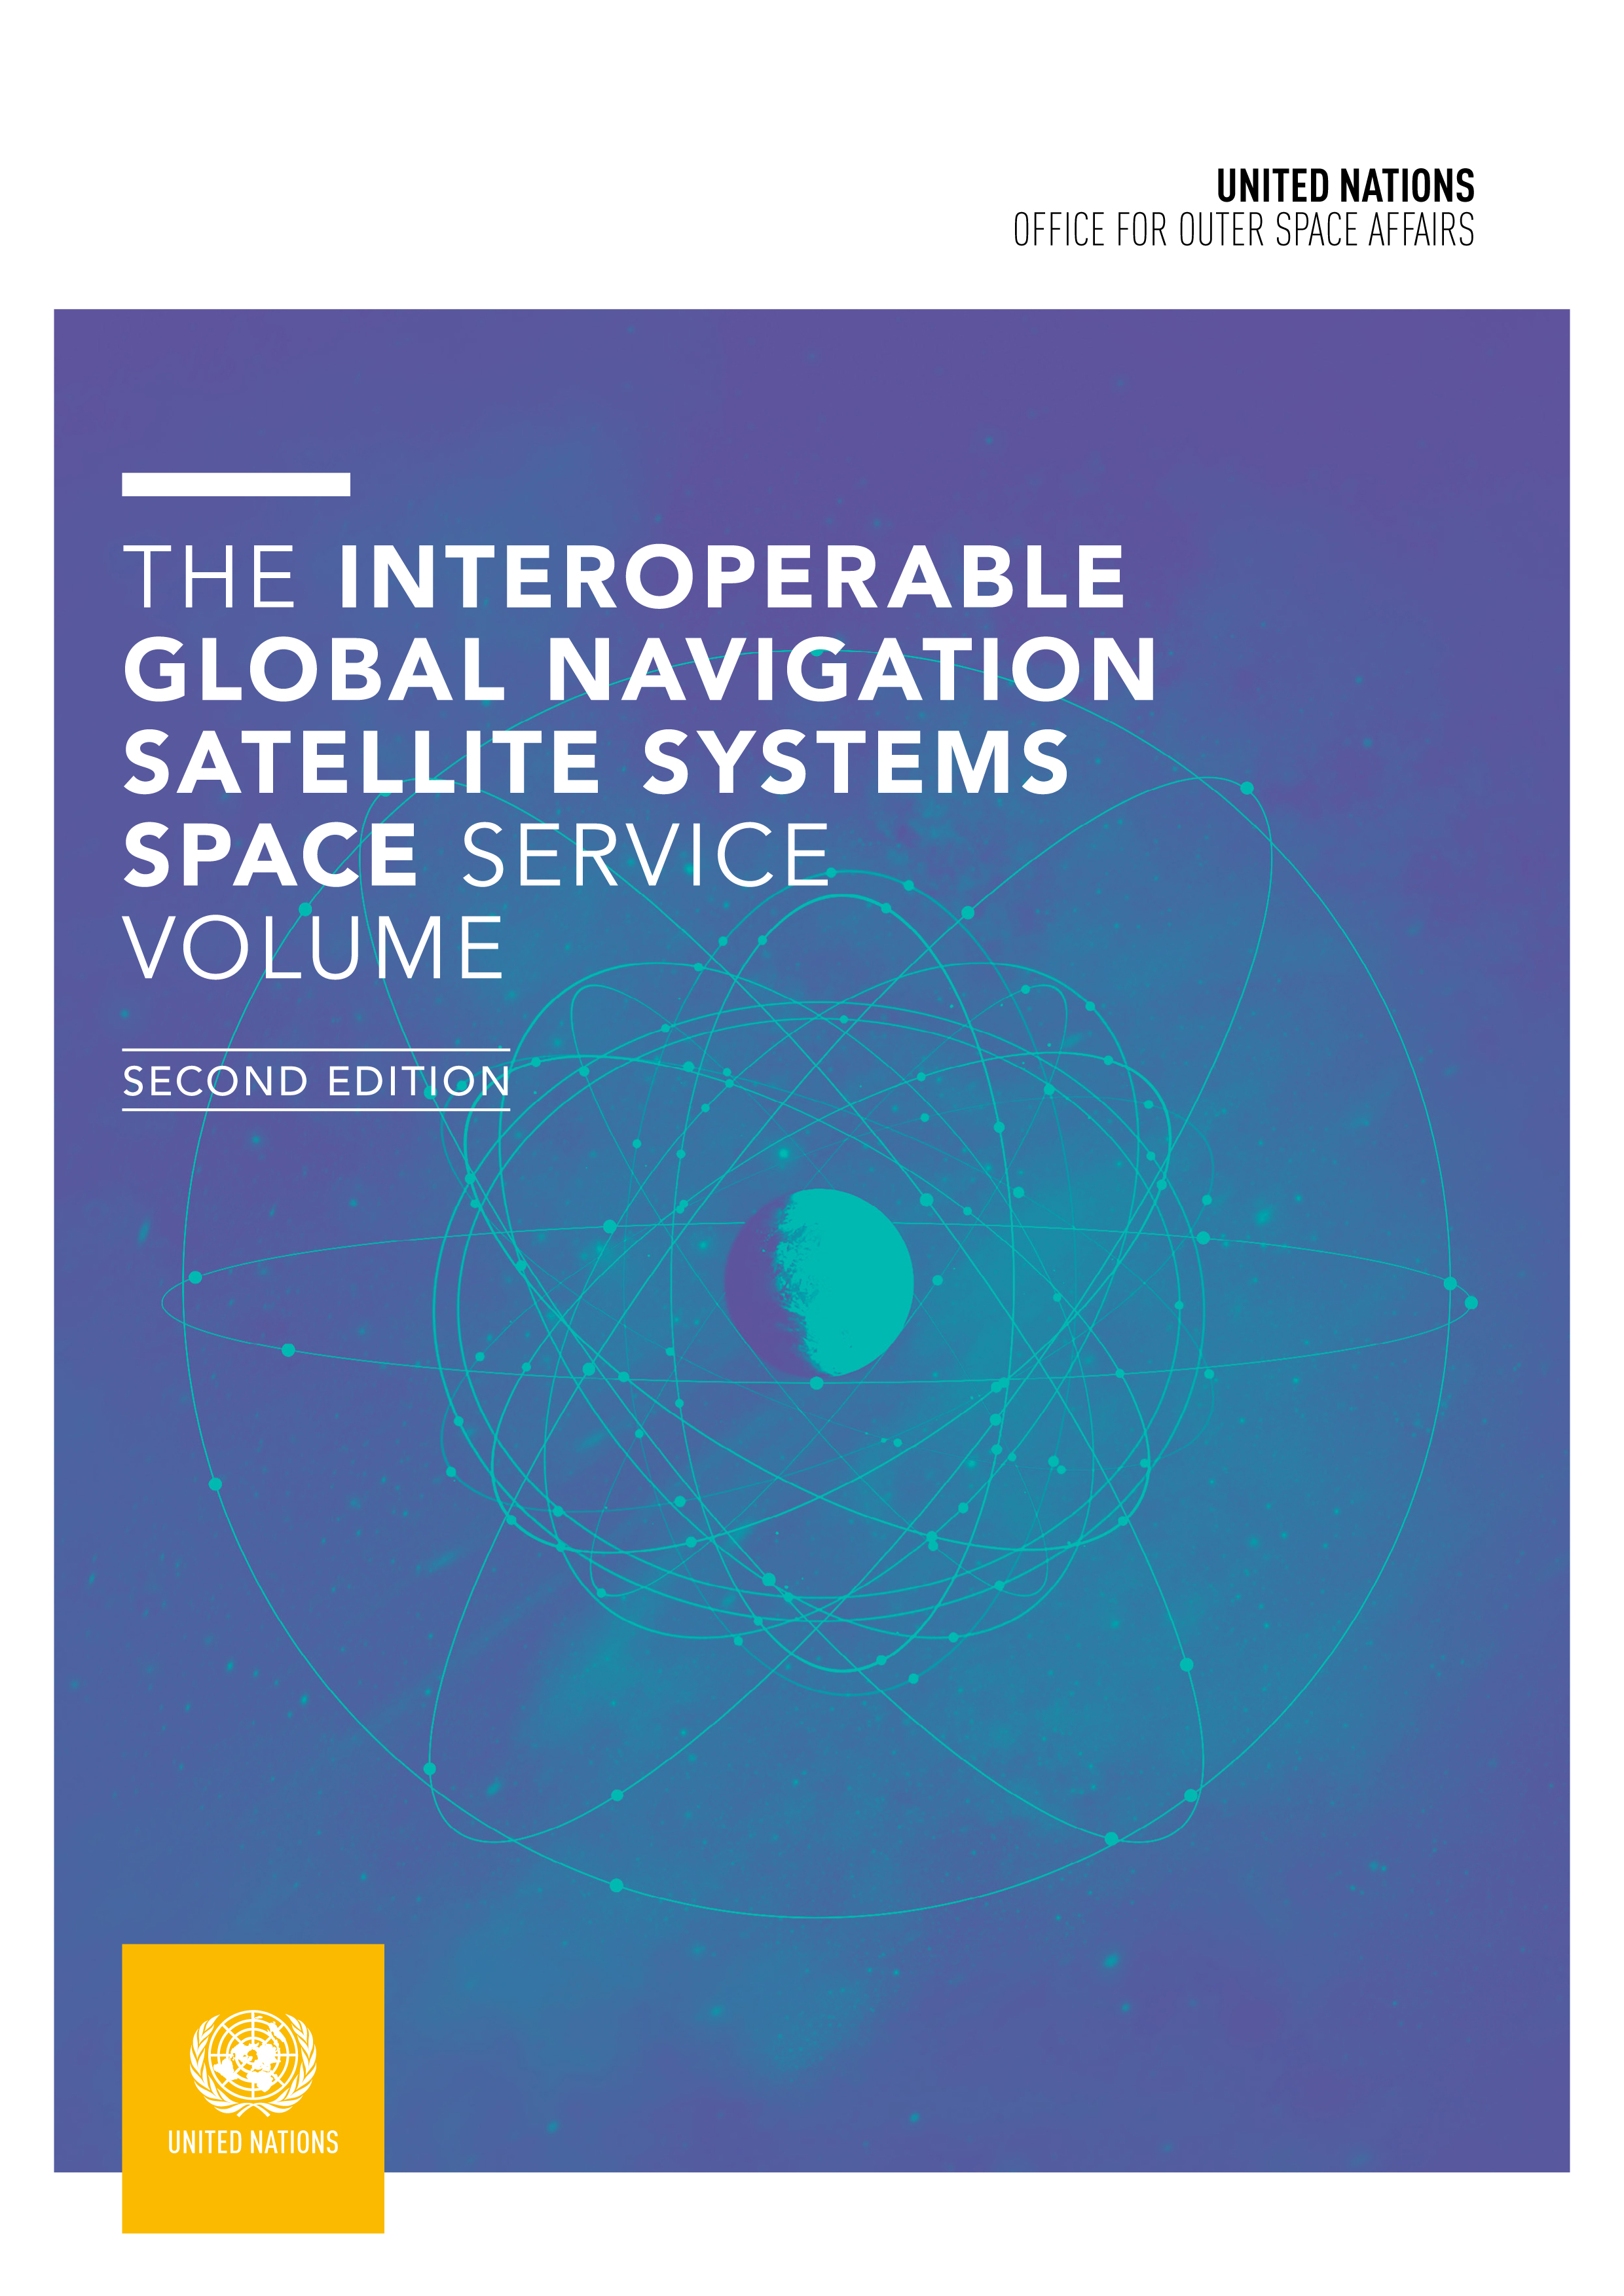 image of The Interoperable Global Navigation Satellite Systems Space Service Volume - Second Edition